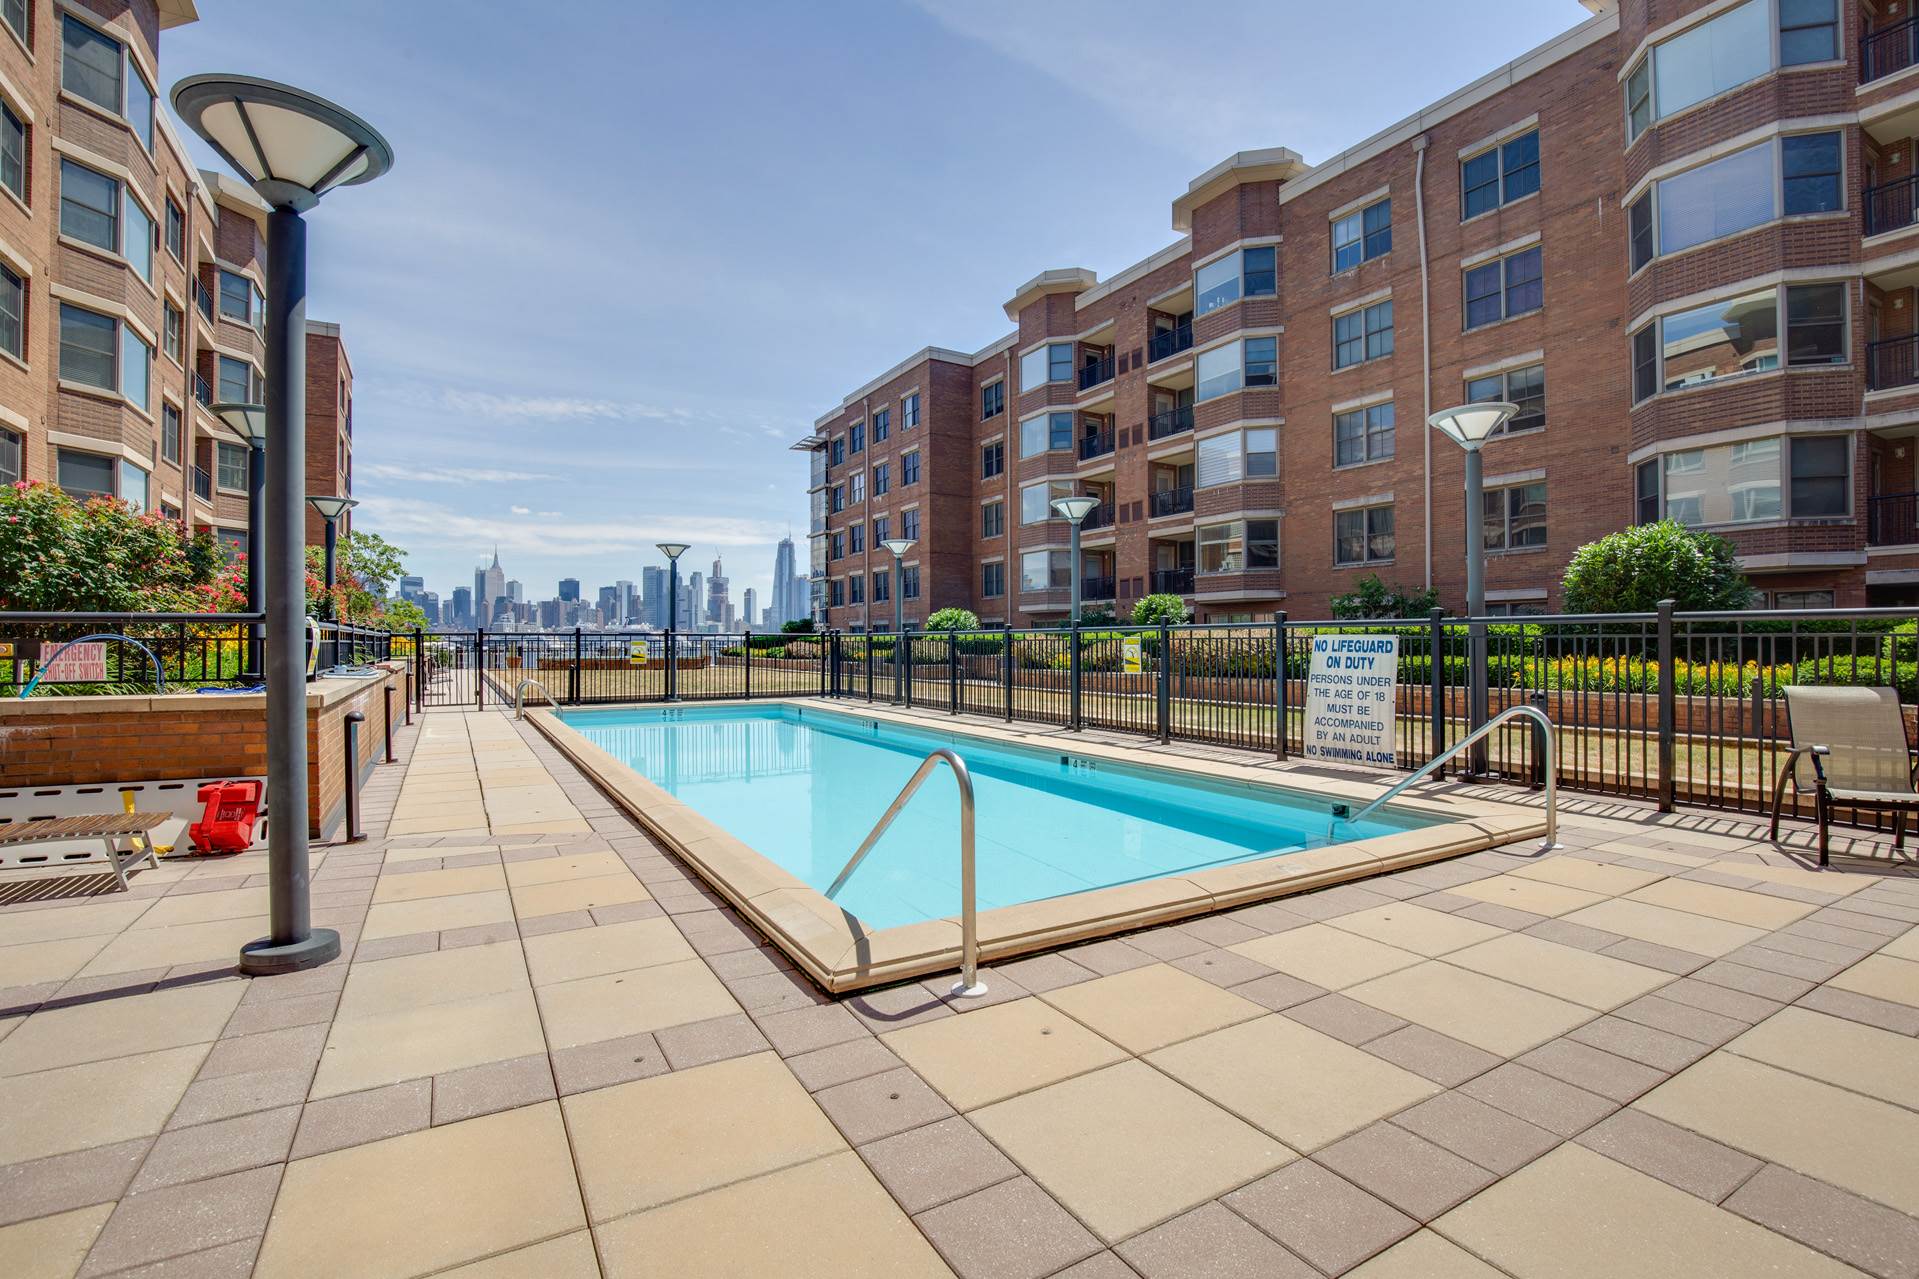 22 Avenue At Port Imperial #320, West New York, NJ 07093